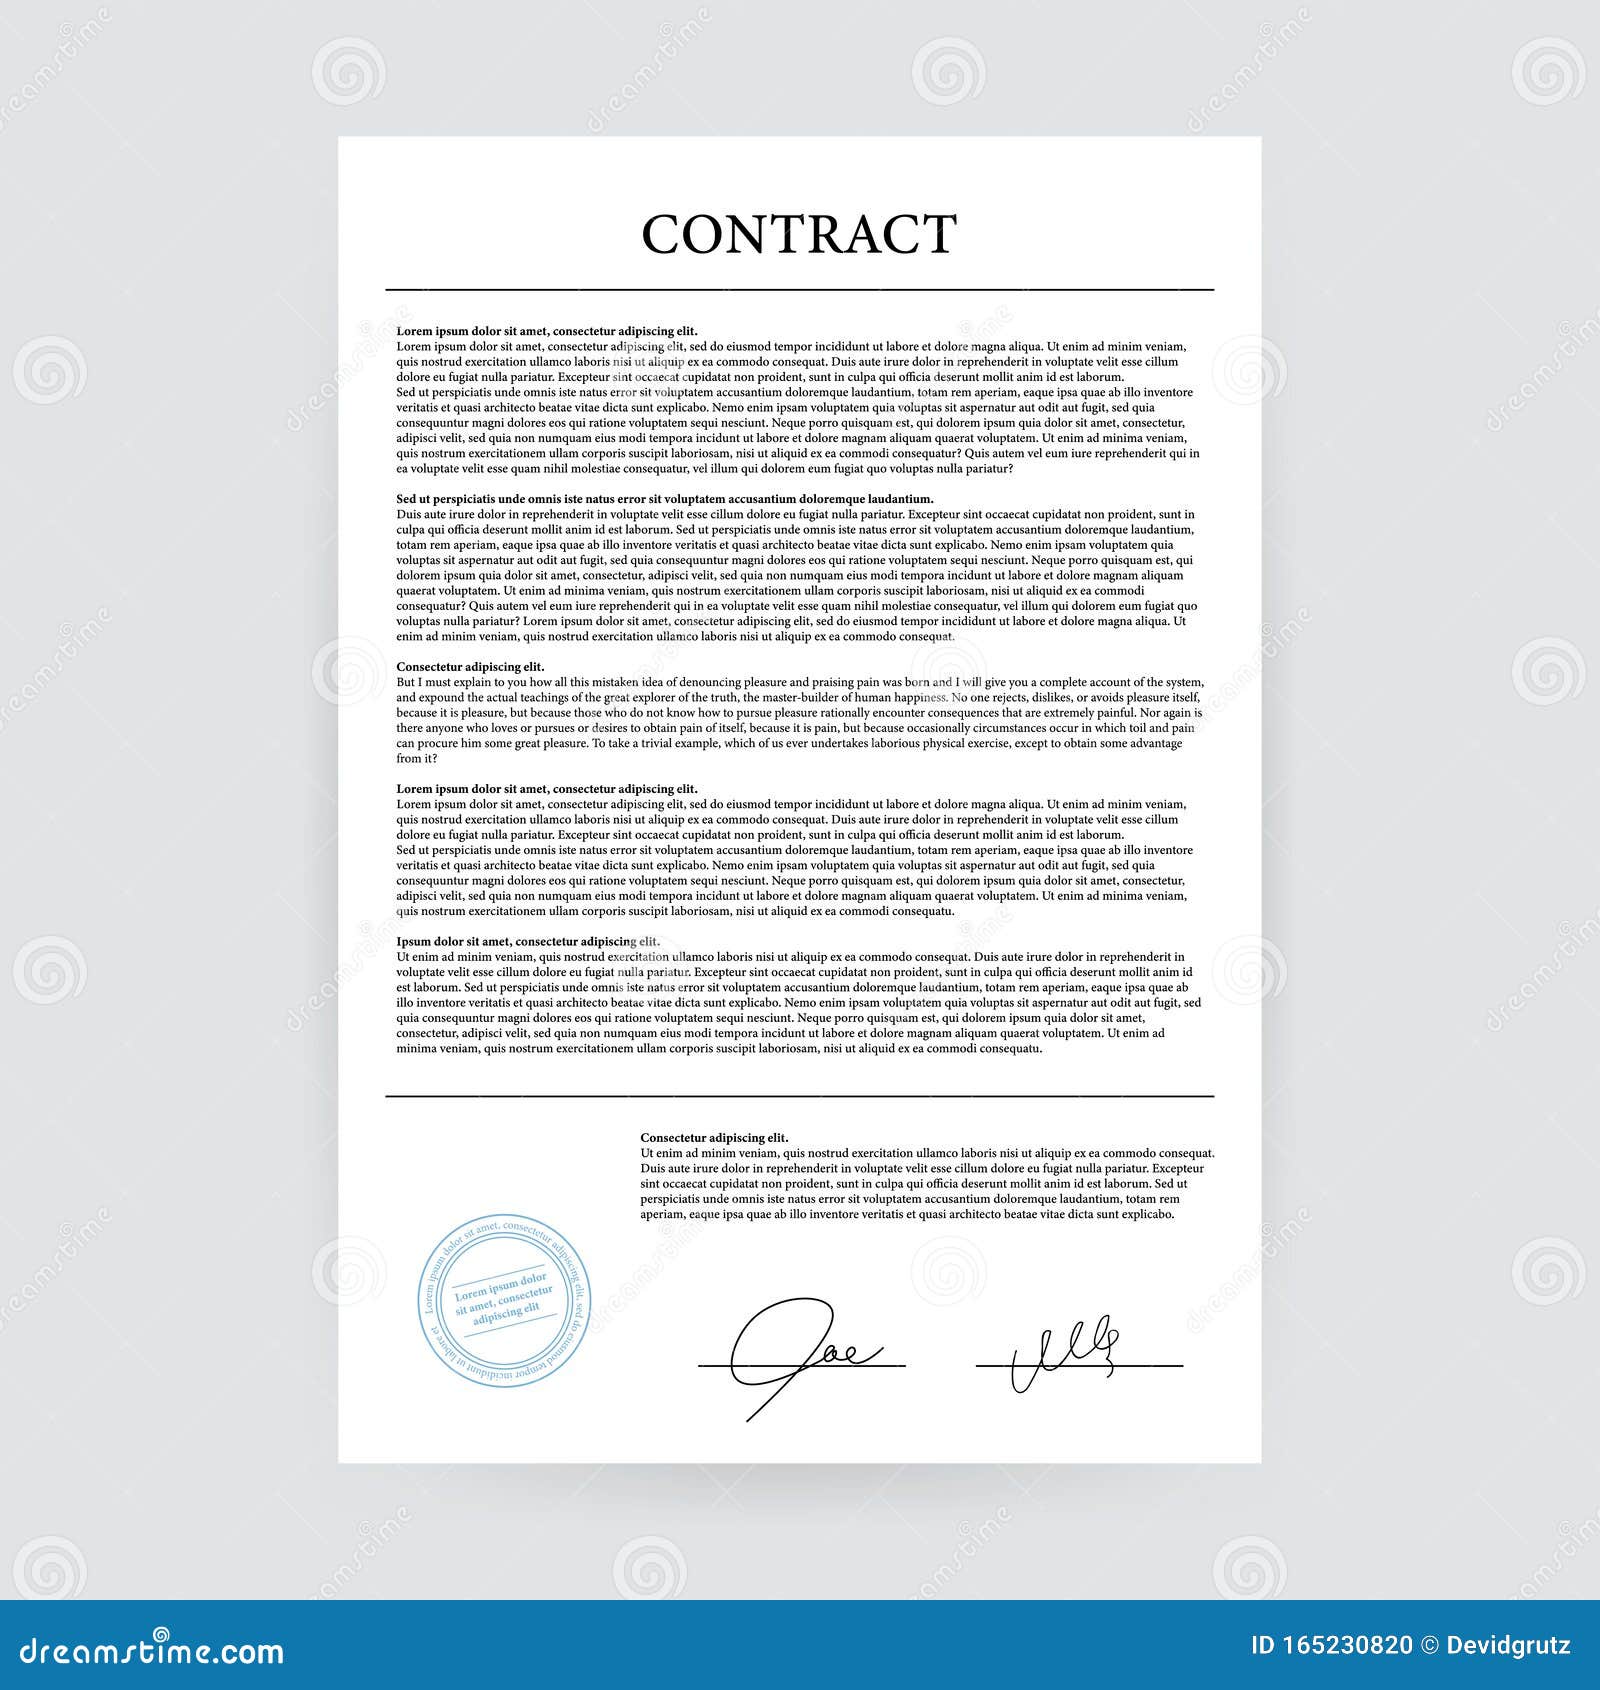 Contract Agreement Paper Blank with Seal. Vector Illustration Regarding free newspaper advertising contract template